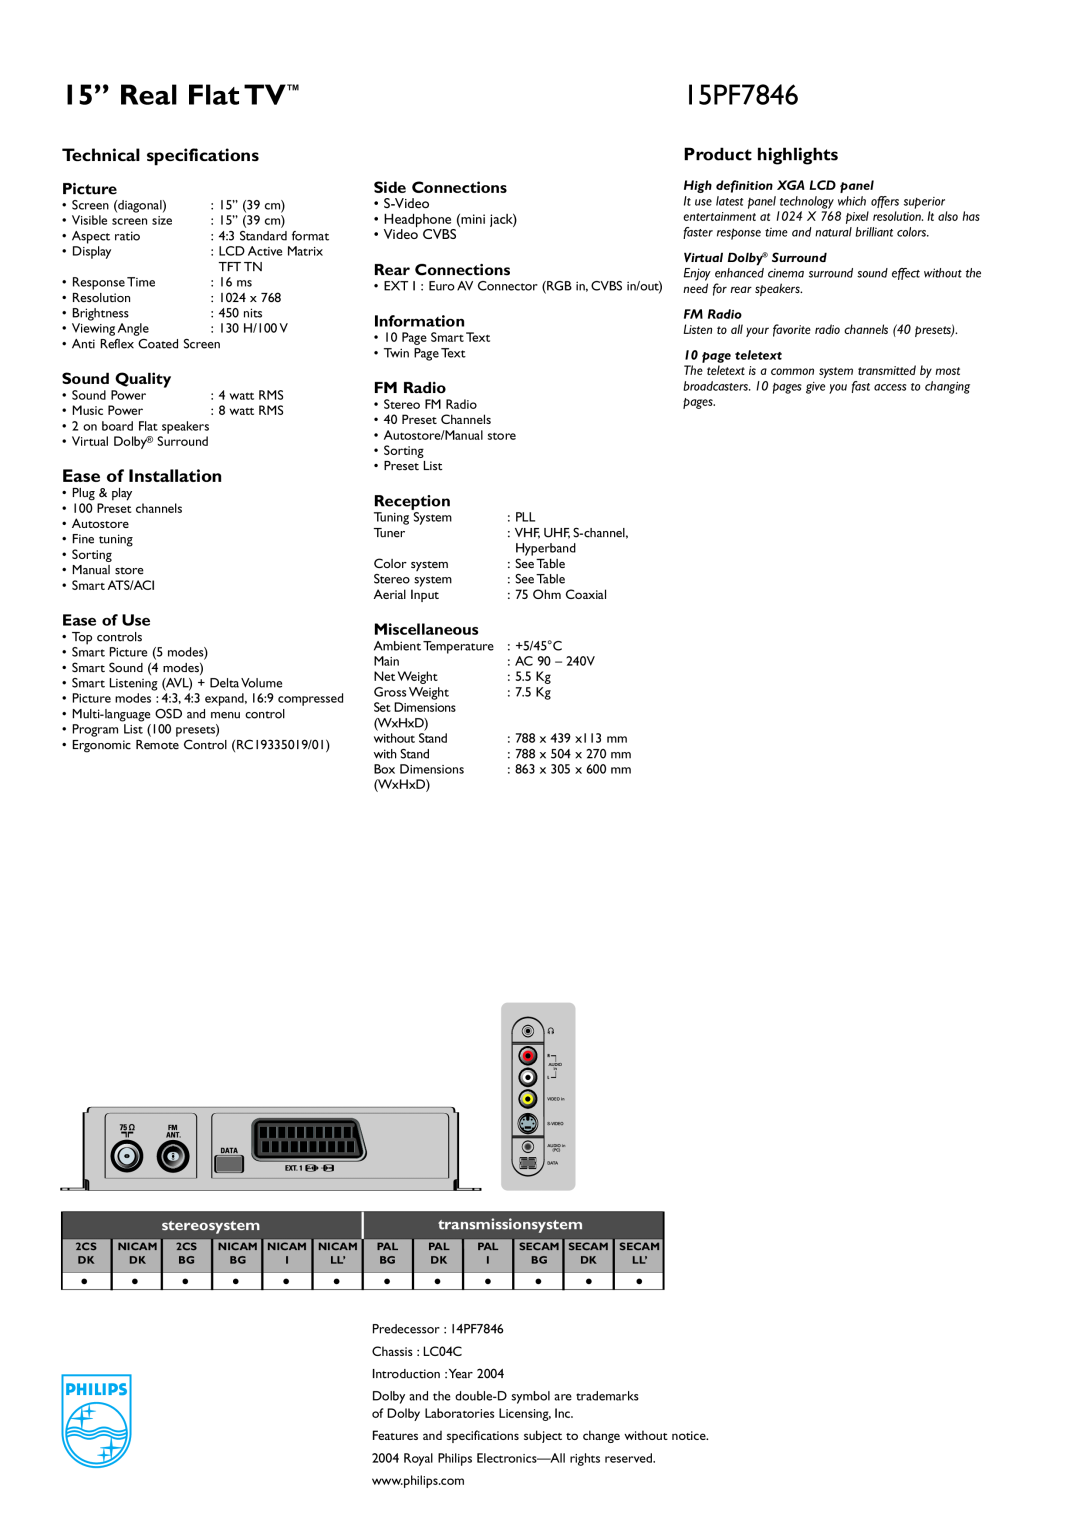 Philips 15PF7846 Technical specifications, Ease of Installation, Product highlights, 15” Real Flat TV, Picture, FM Radio 